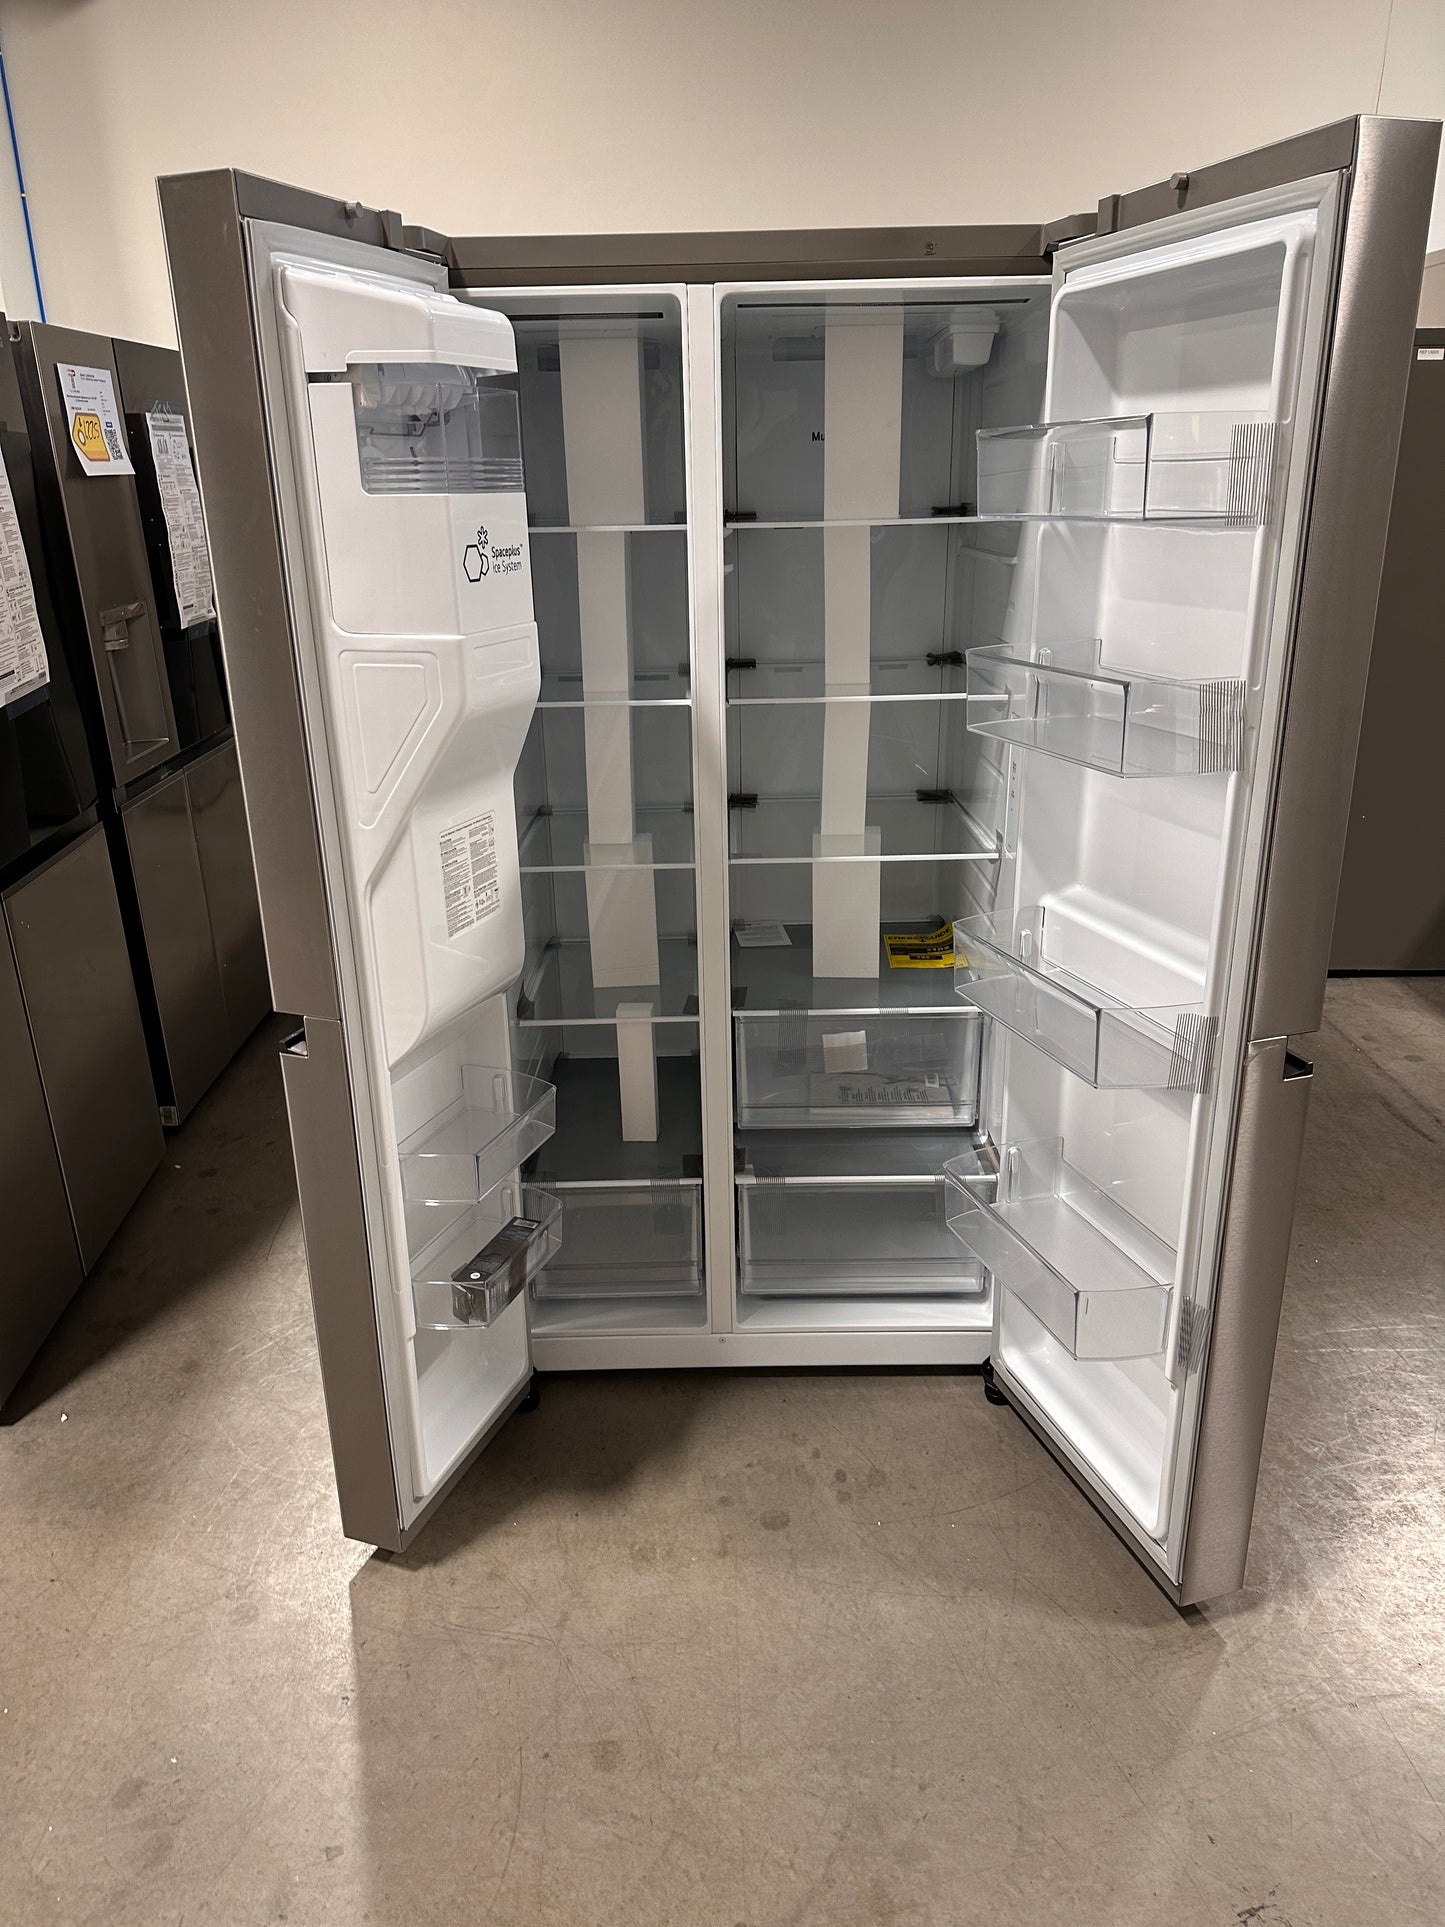 27.2 Cu. Ft. Side-by-Side Refrigerator with SpacePlus Ice - MODEL: LRSXS2706S  REF13003